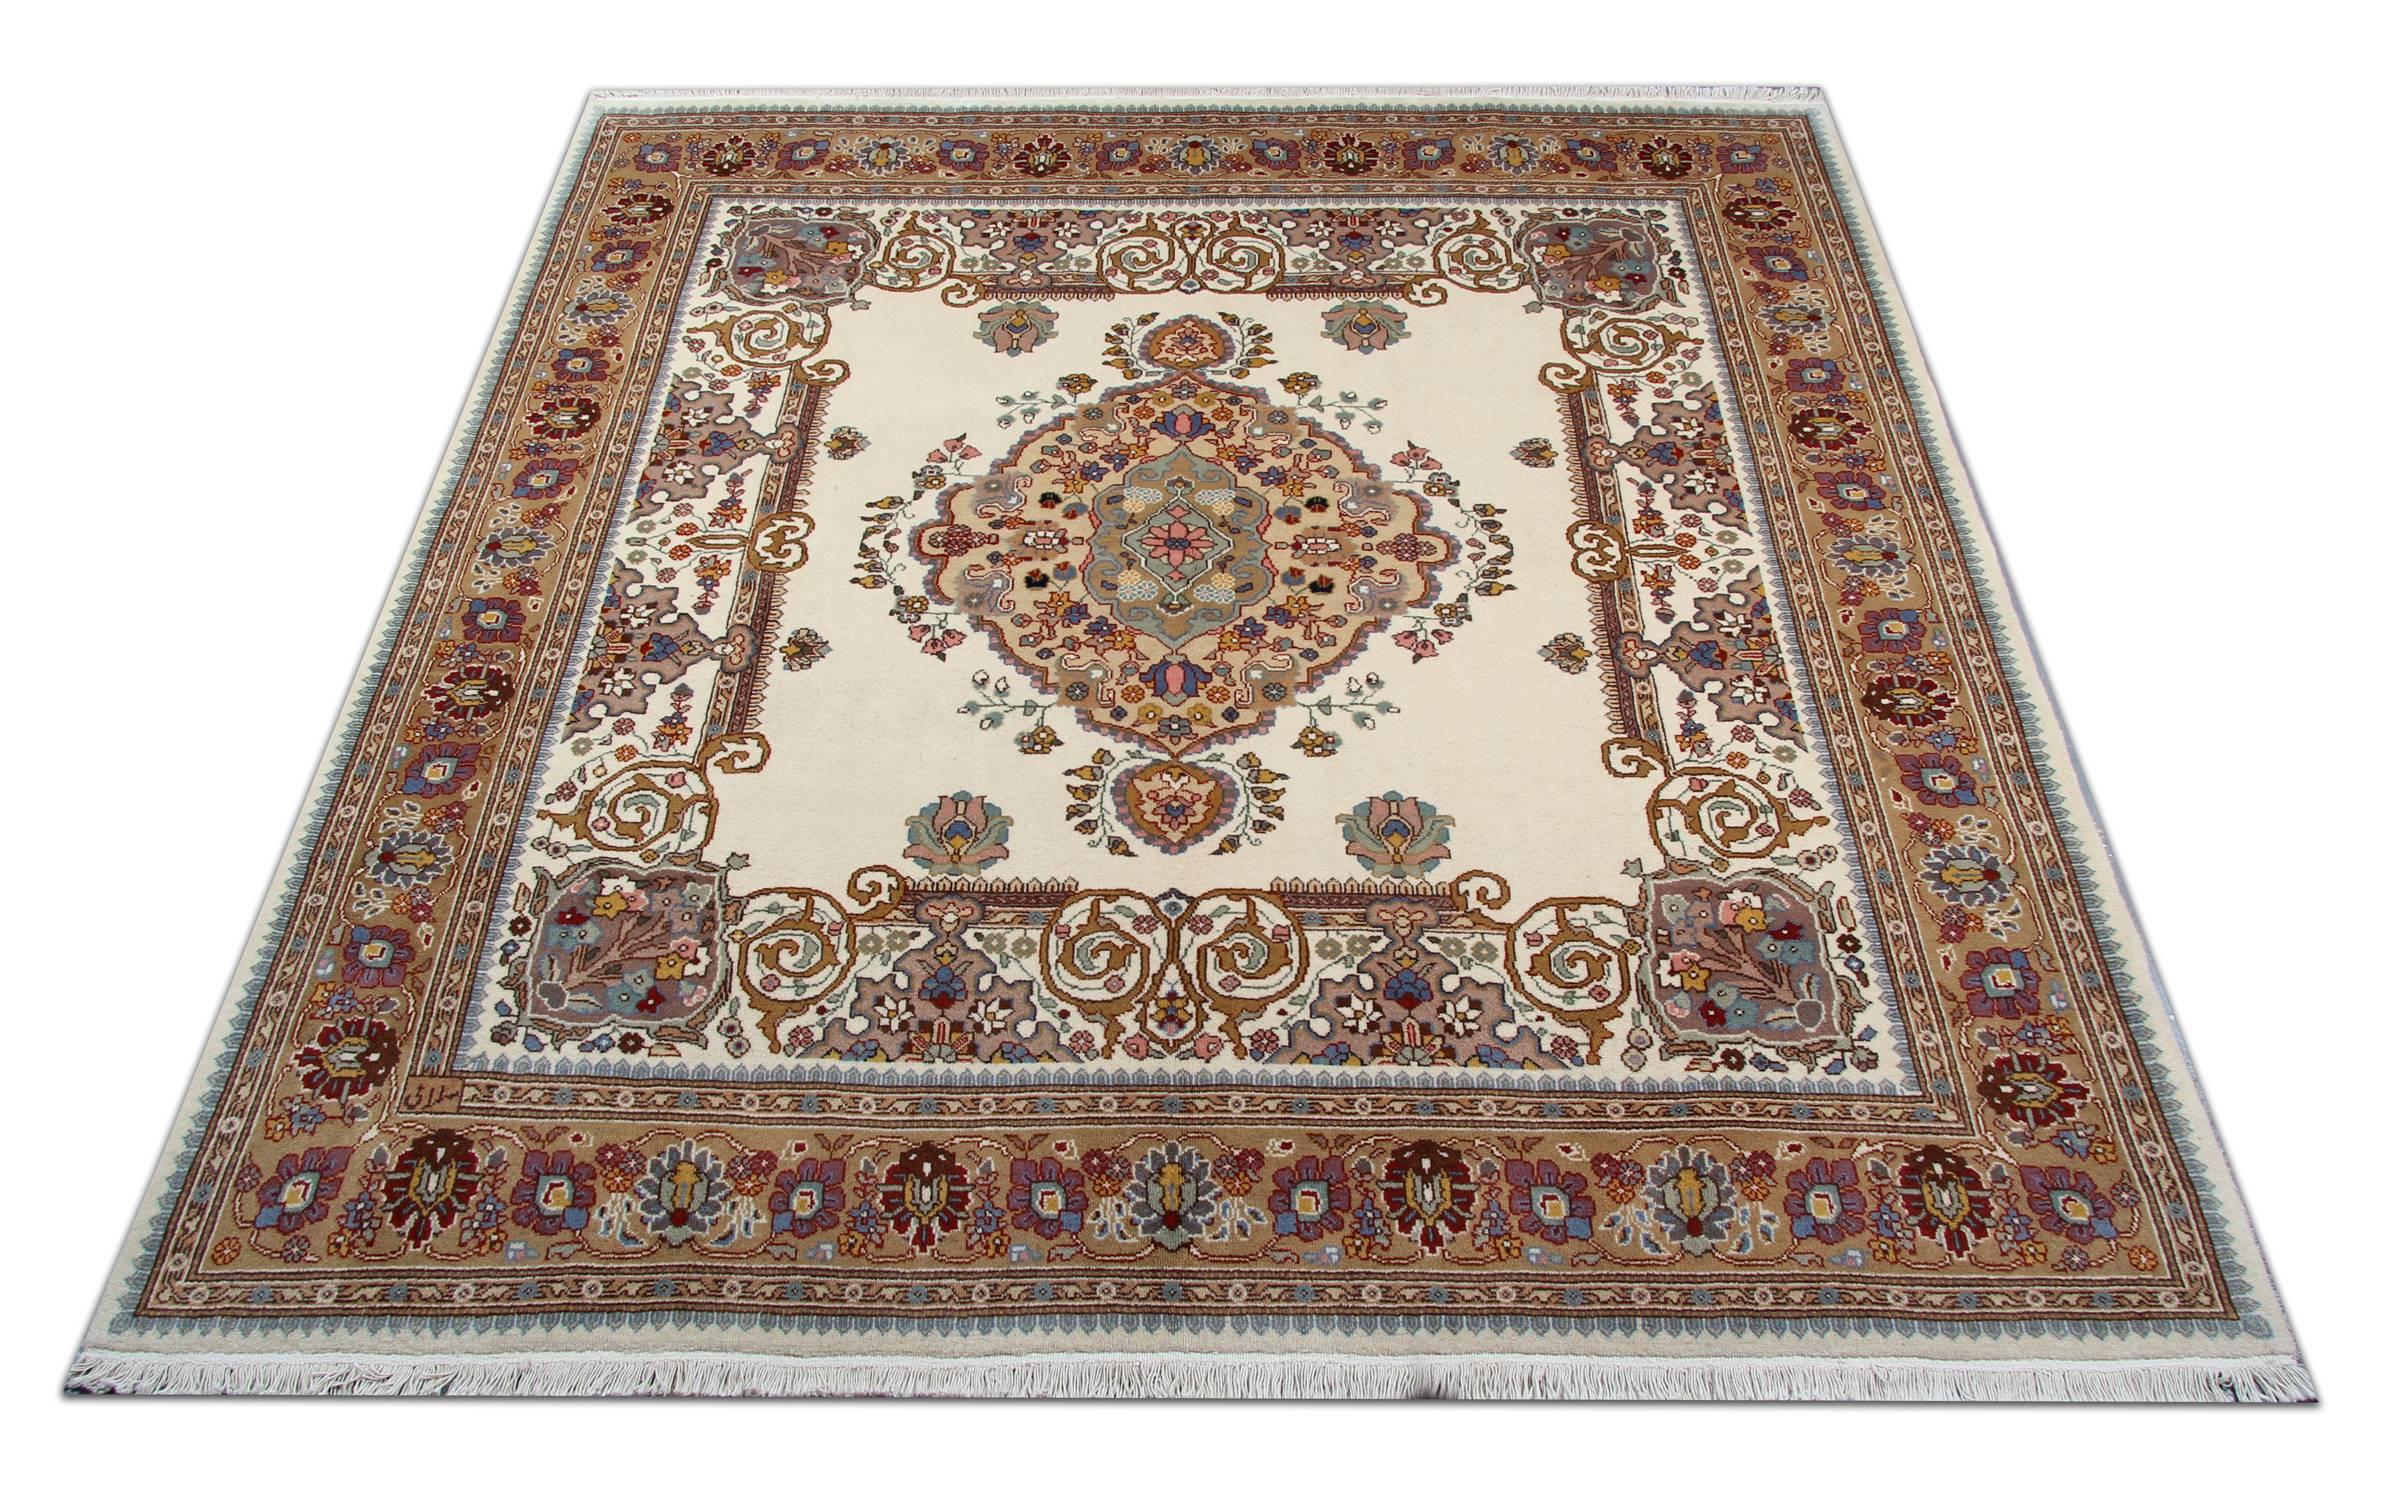 This unique wool rug has been woven with a fantastic neutral colour pallet. Cream and beige are the predominant background colours in this piece, decorated with amazing floral patterns woven in accents of muted green, blue, pink and yellow colours.